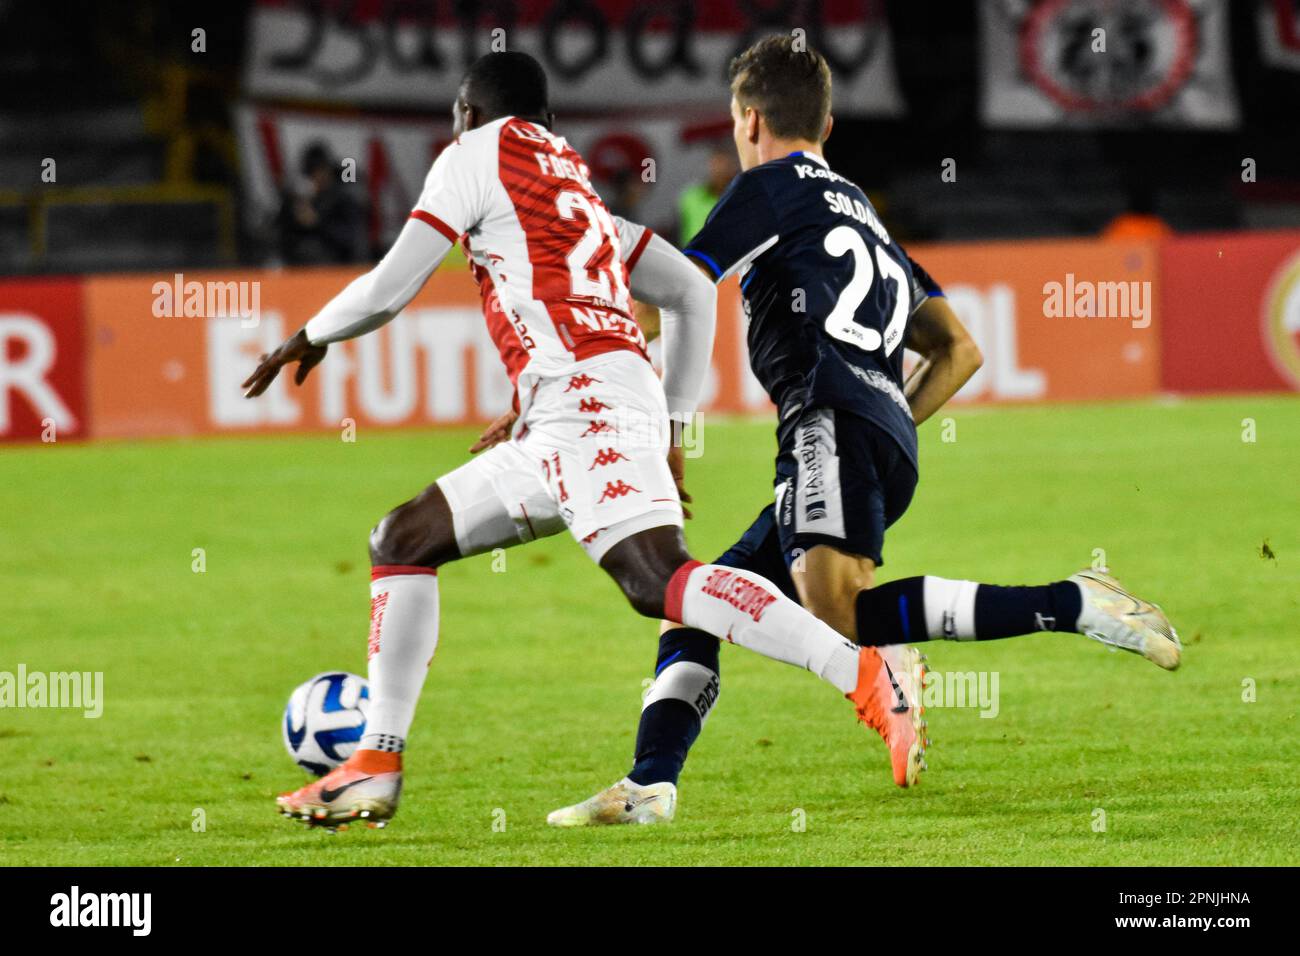 Independiente Santa Fe's Fabio Delgado and Gimnasia's Franco Soldano during the Independiente Santa Fe V Gimnasia match during the CONMEBOL Libertadores group match, on April 18, 2023. Photo by: Cristian Bayona/Long Visual Press Stock Photo